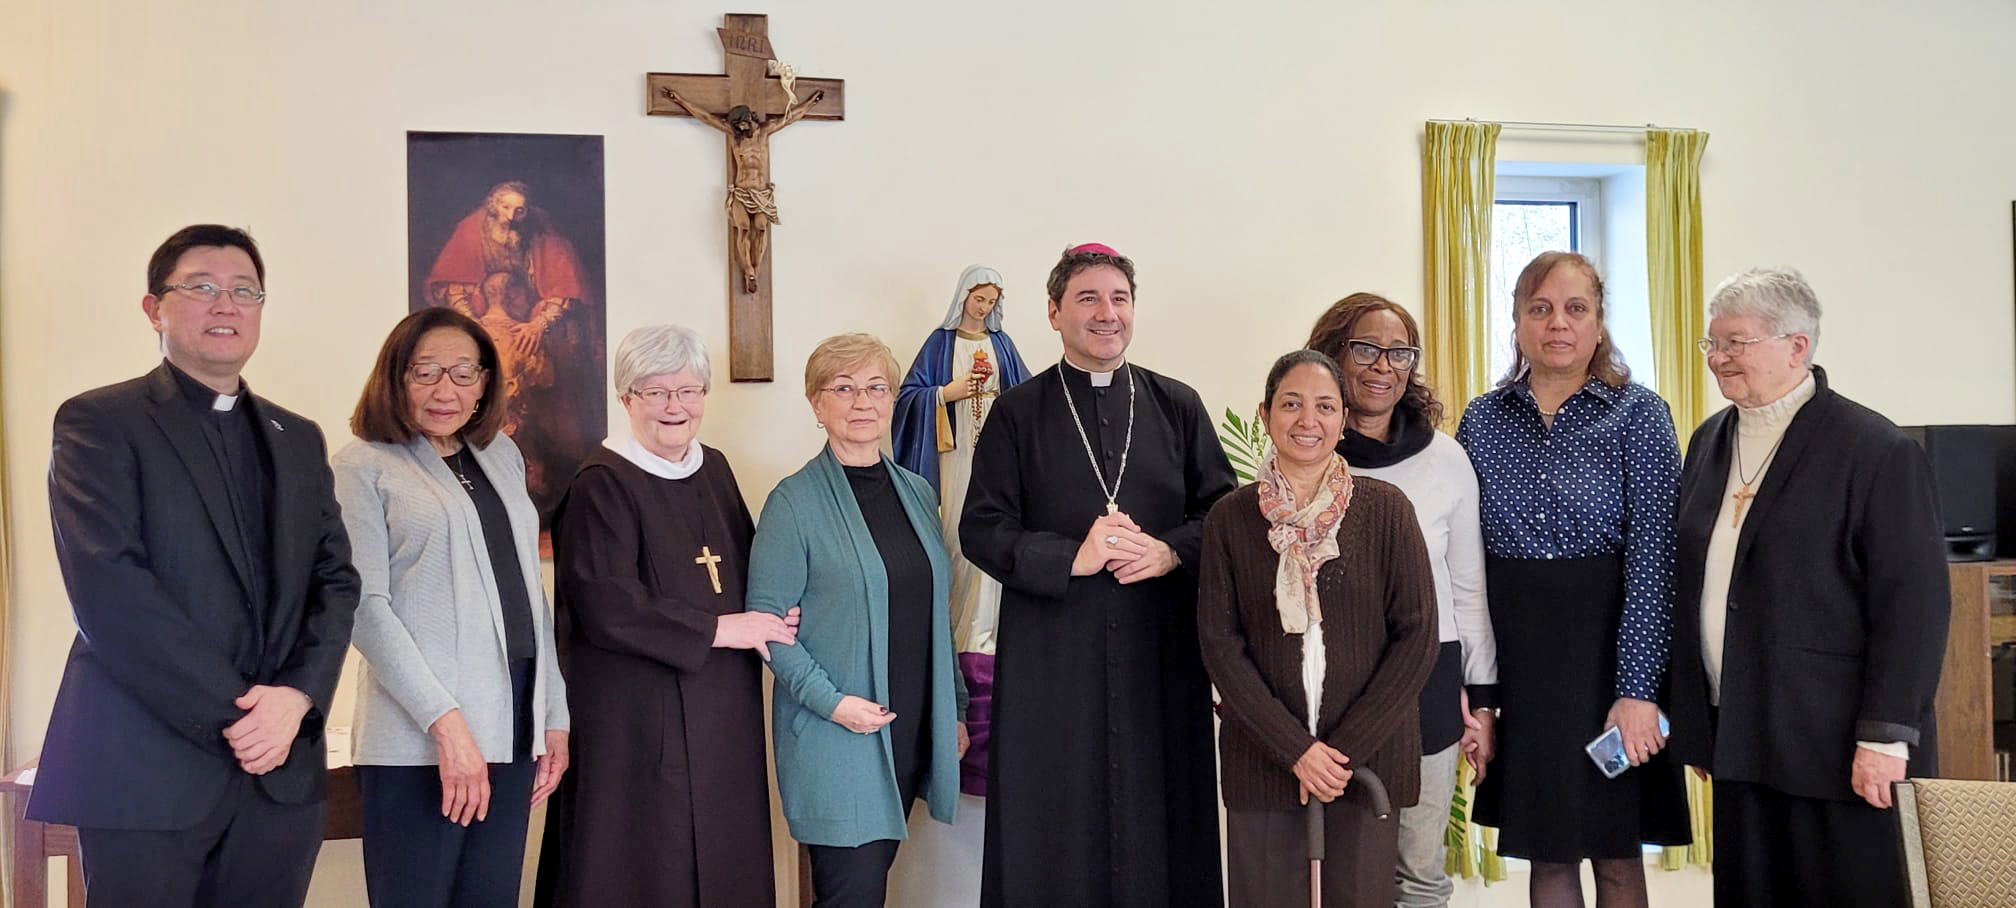 Archbishop Leo Visits the Felician Sisters